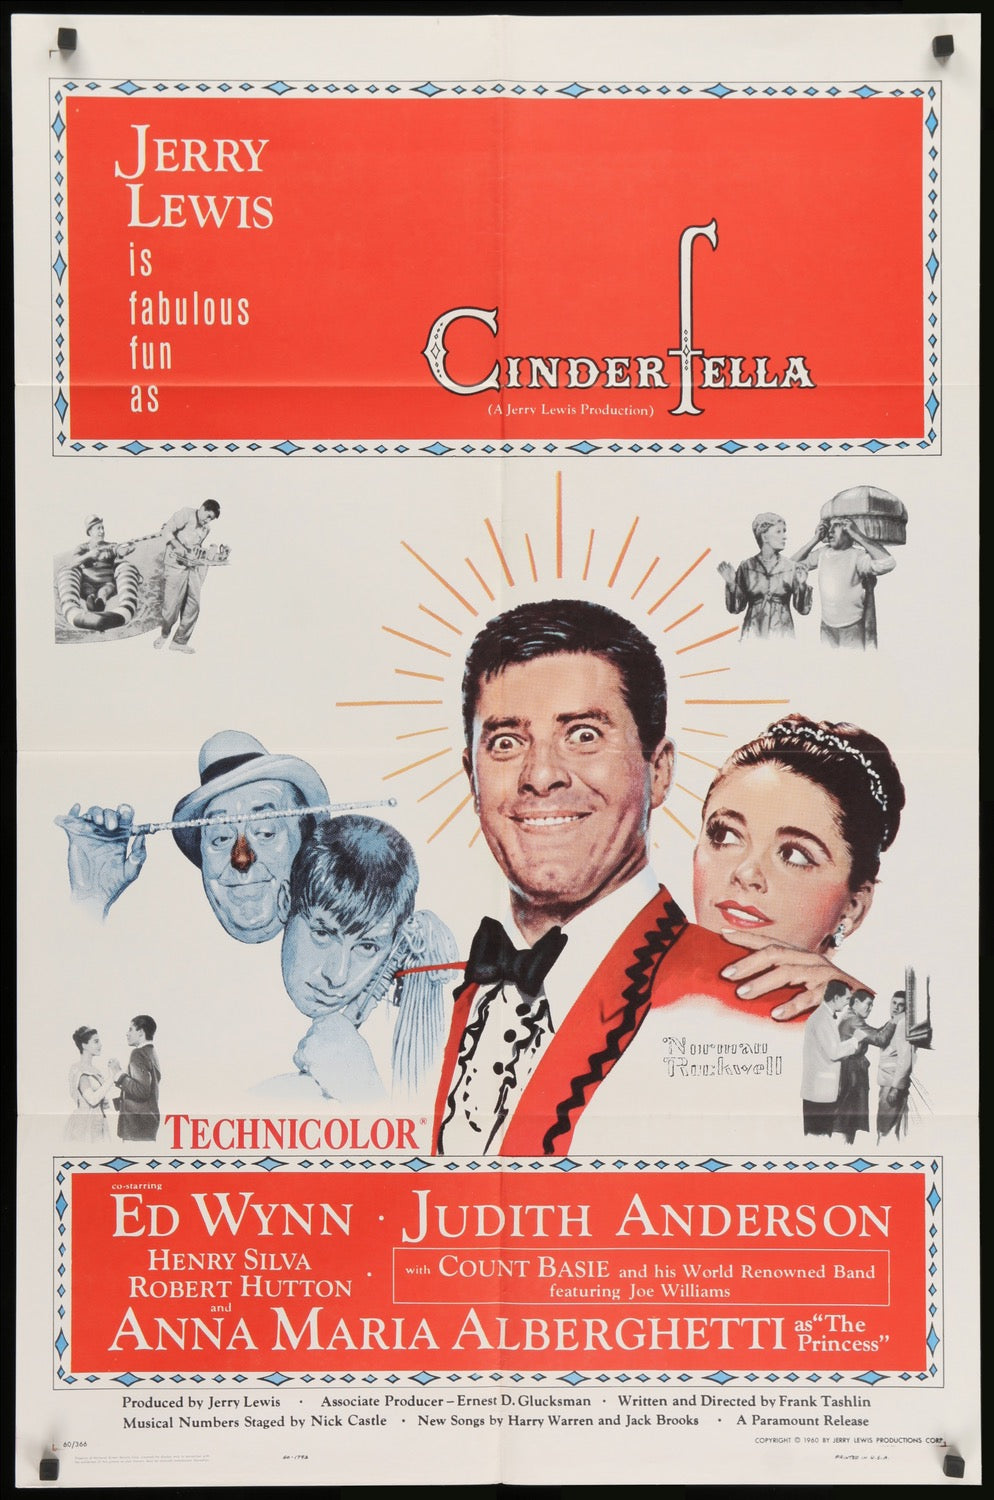 jerry lewis movie posters